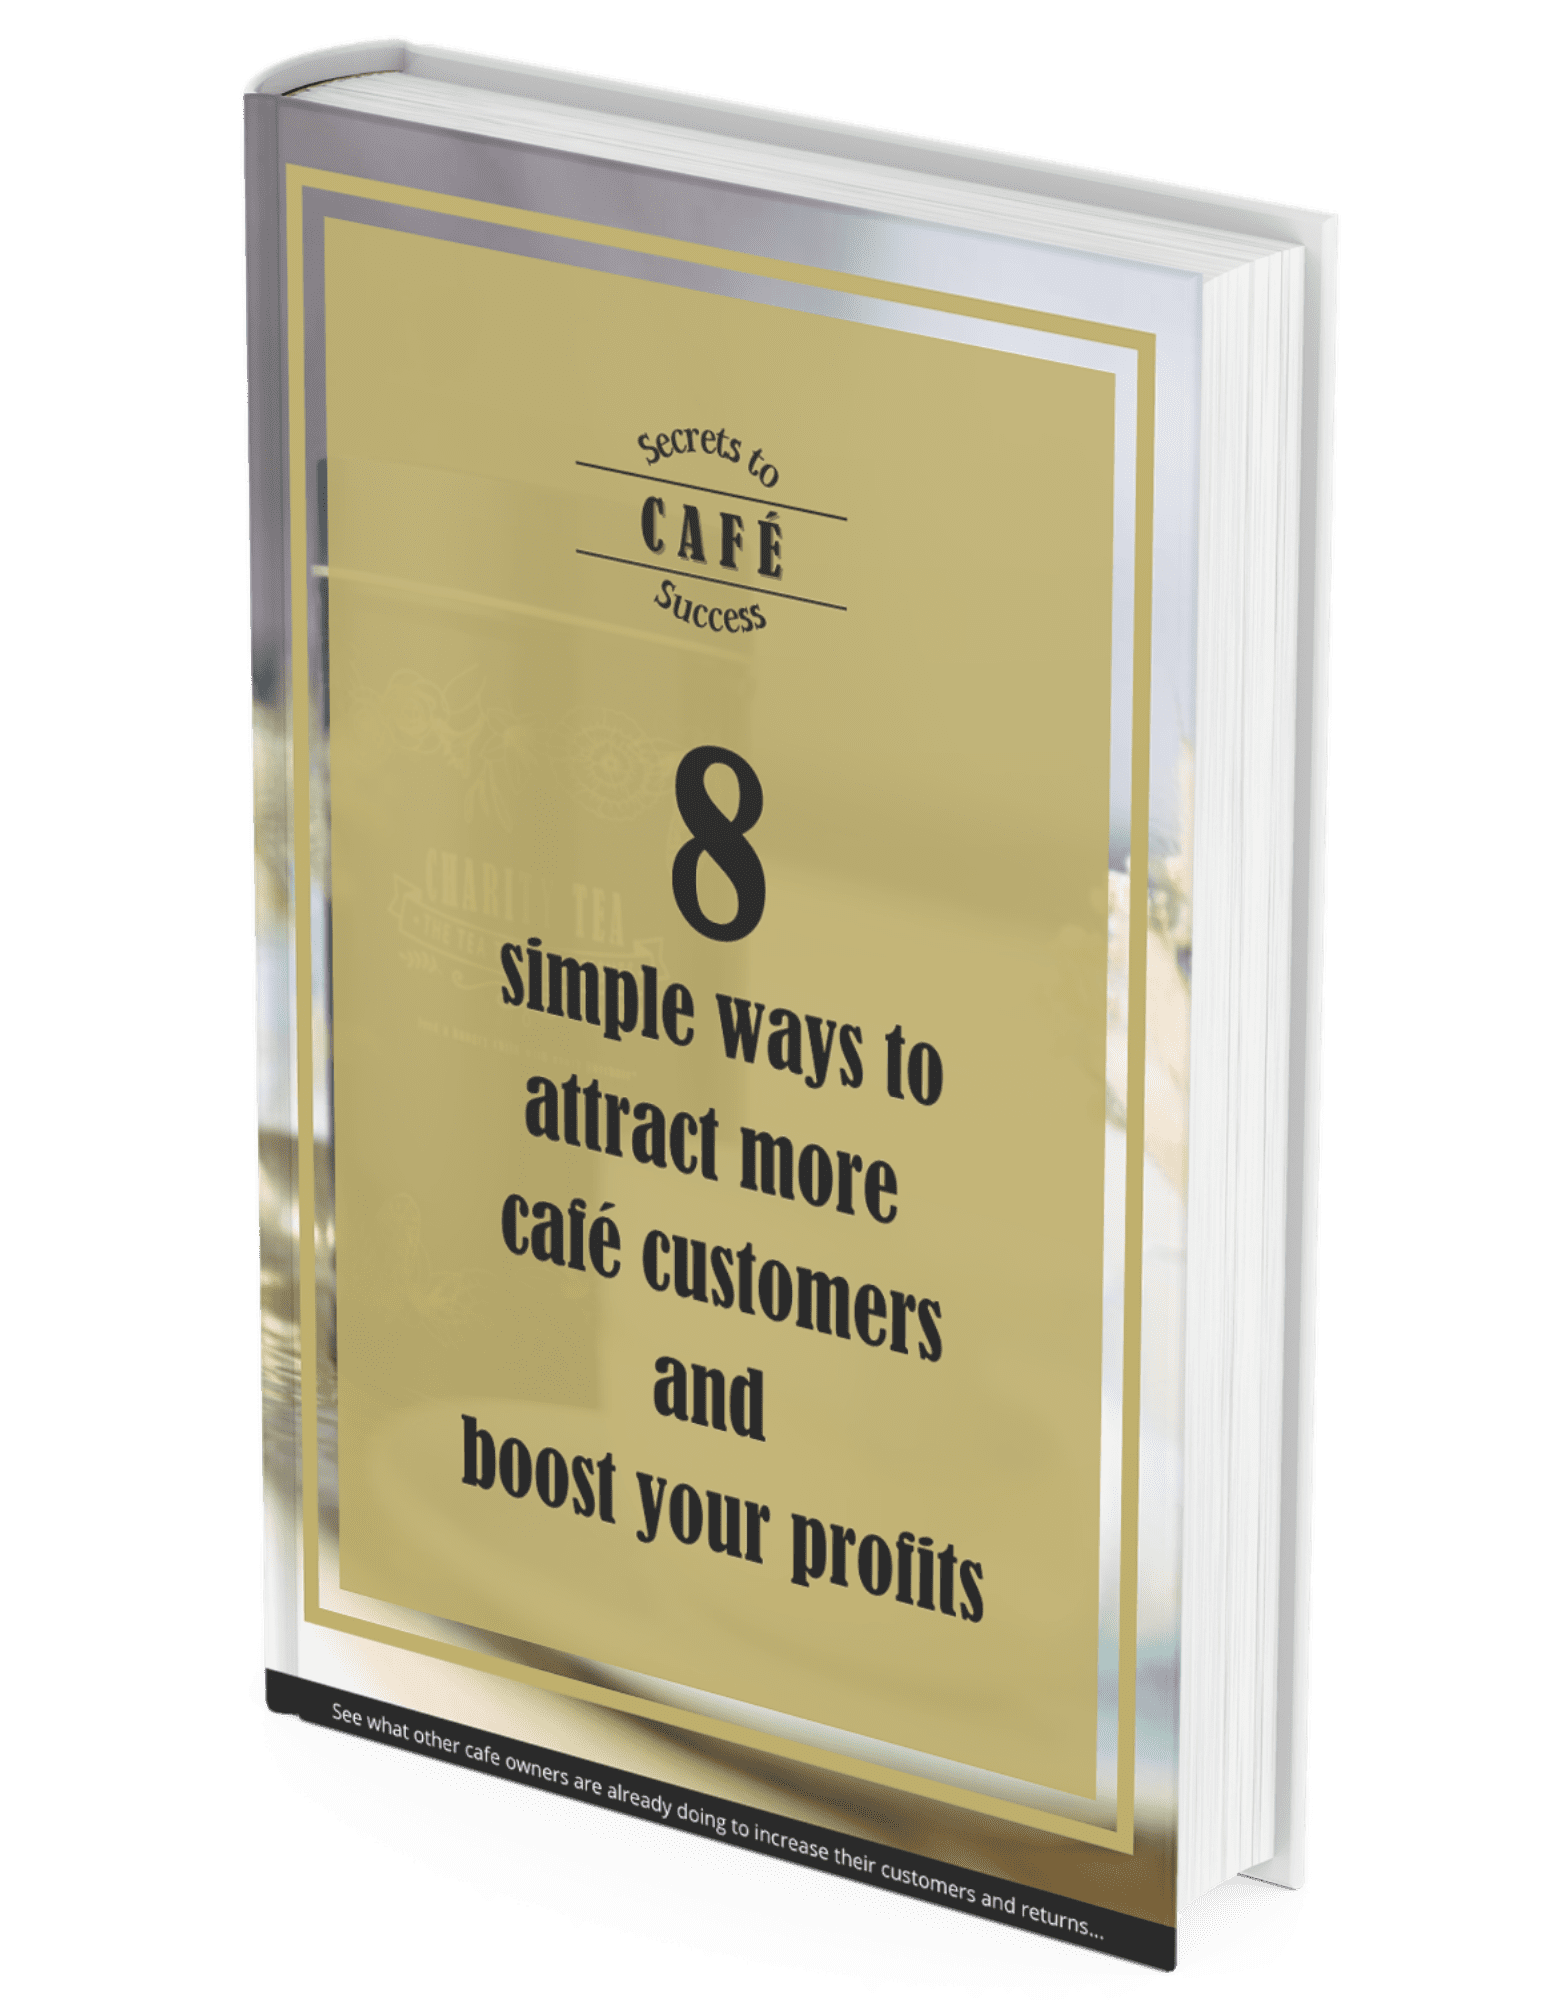 secrets to success cafe owners